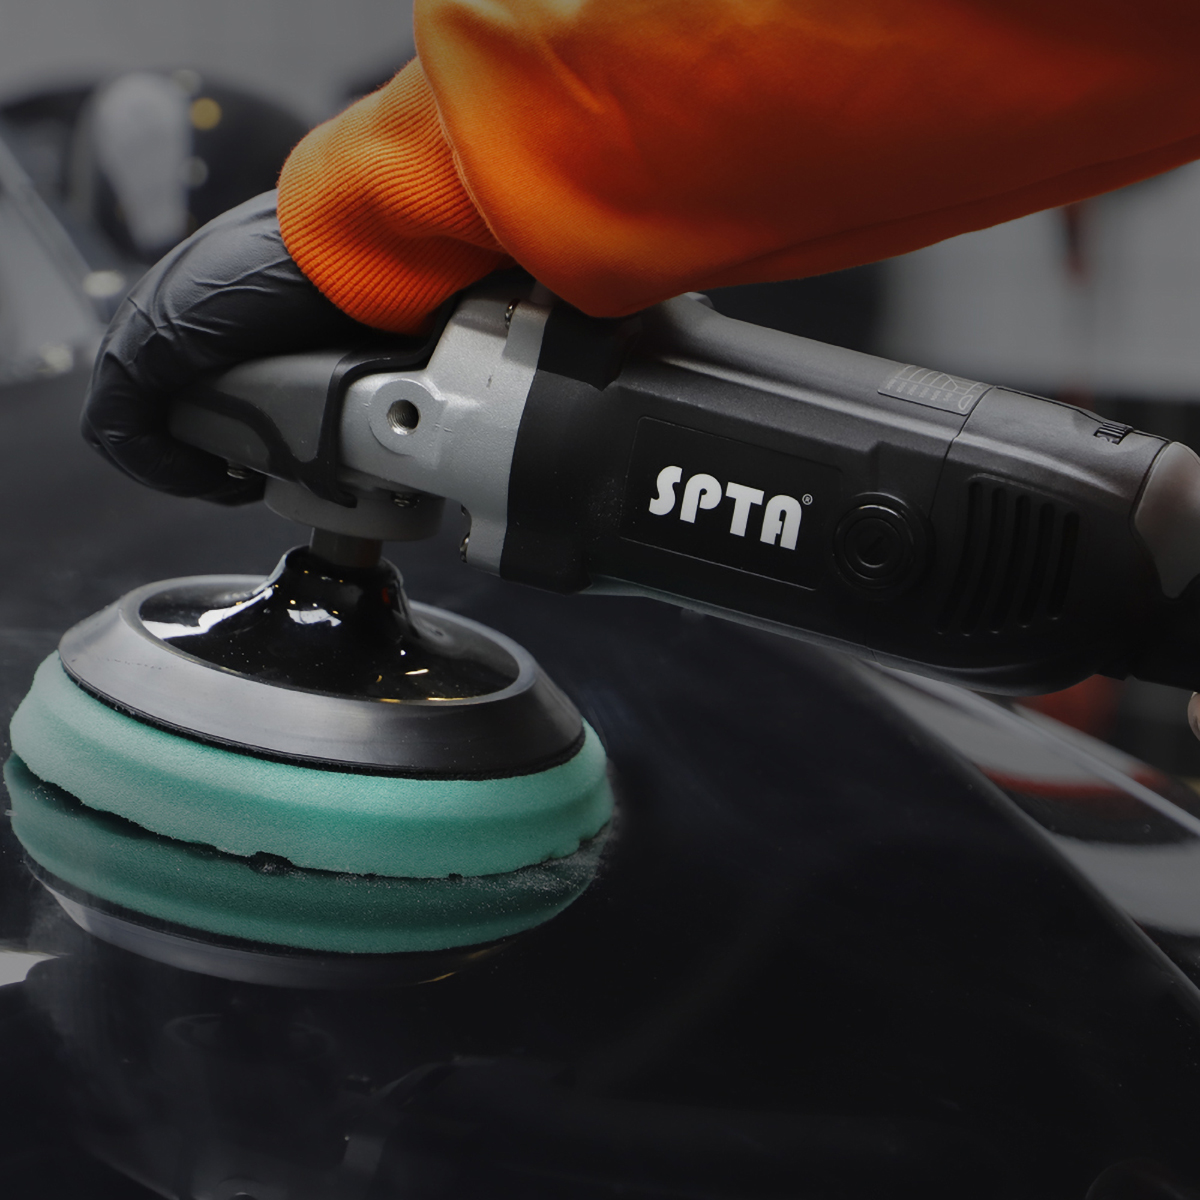 SPTA 3inch Electric Car Detail Polisher, Rotary Poliher with M14